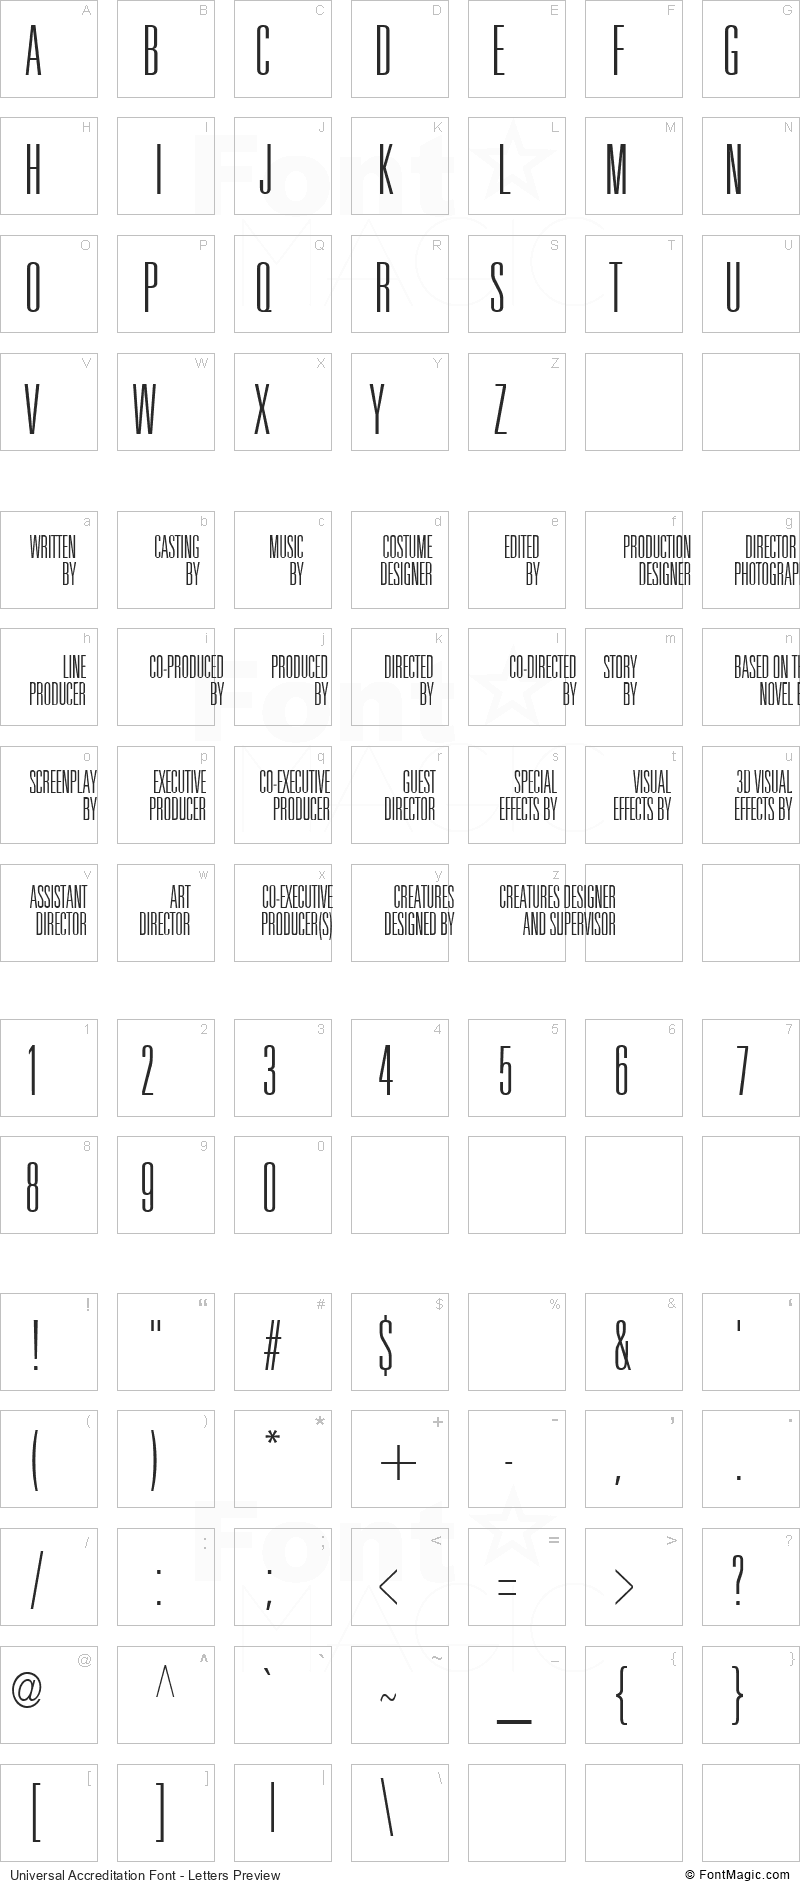 Universal Accreditation Font - All Latters Preview Chart